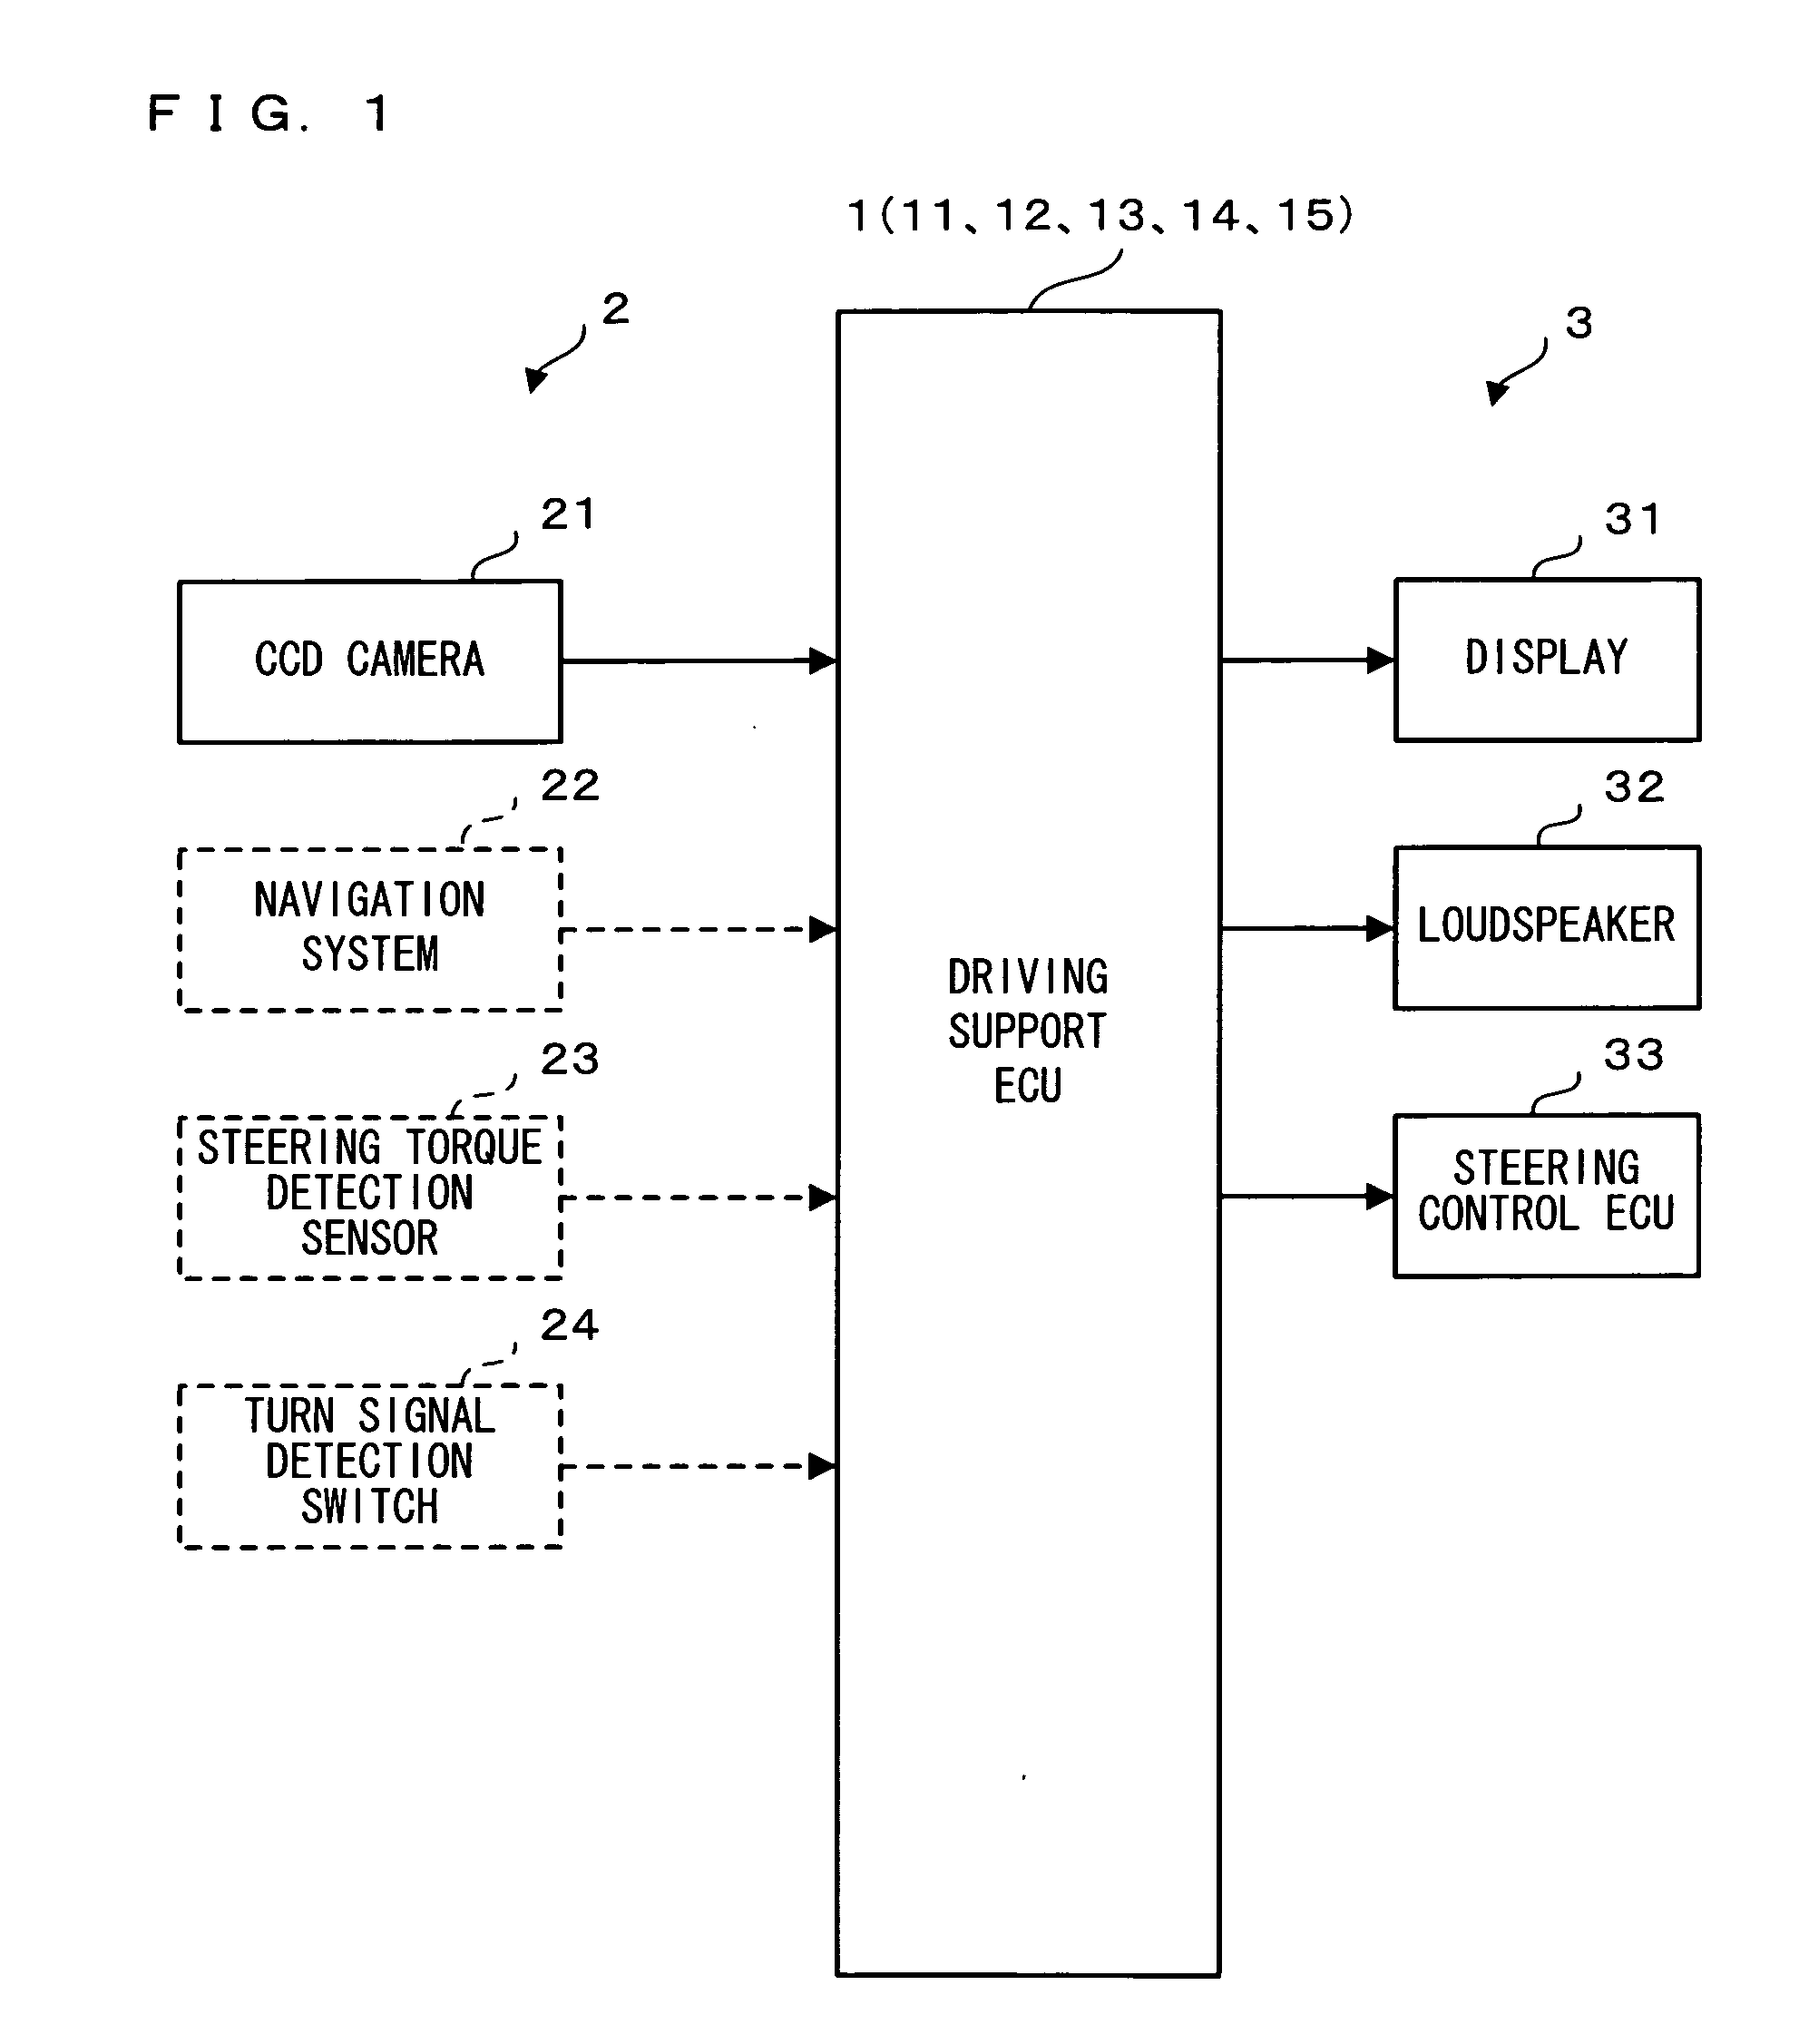 Driving support apparatus